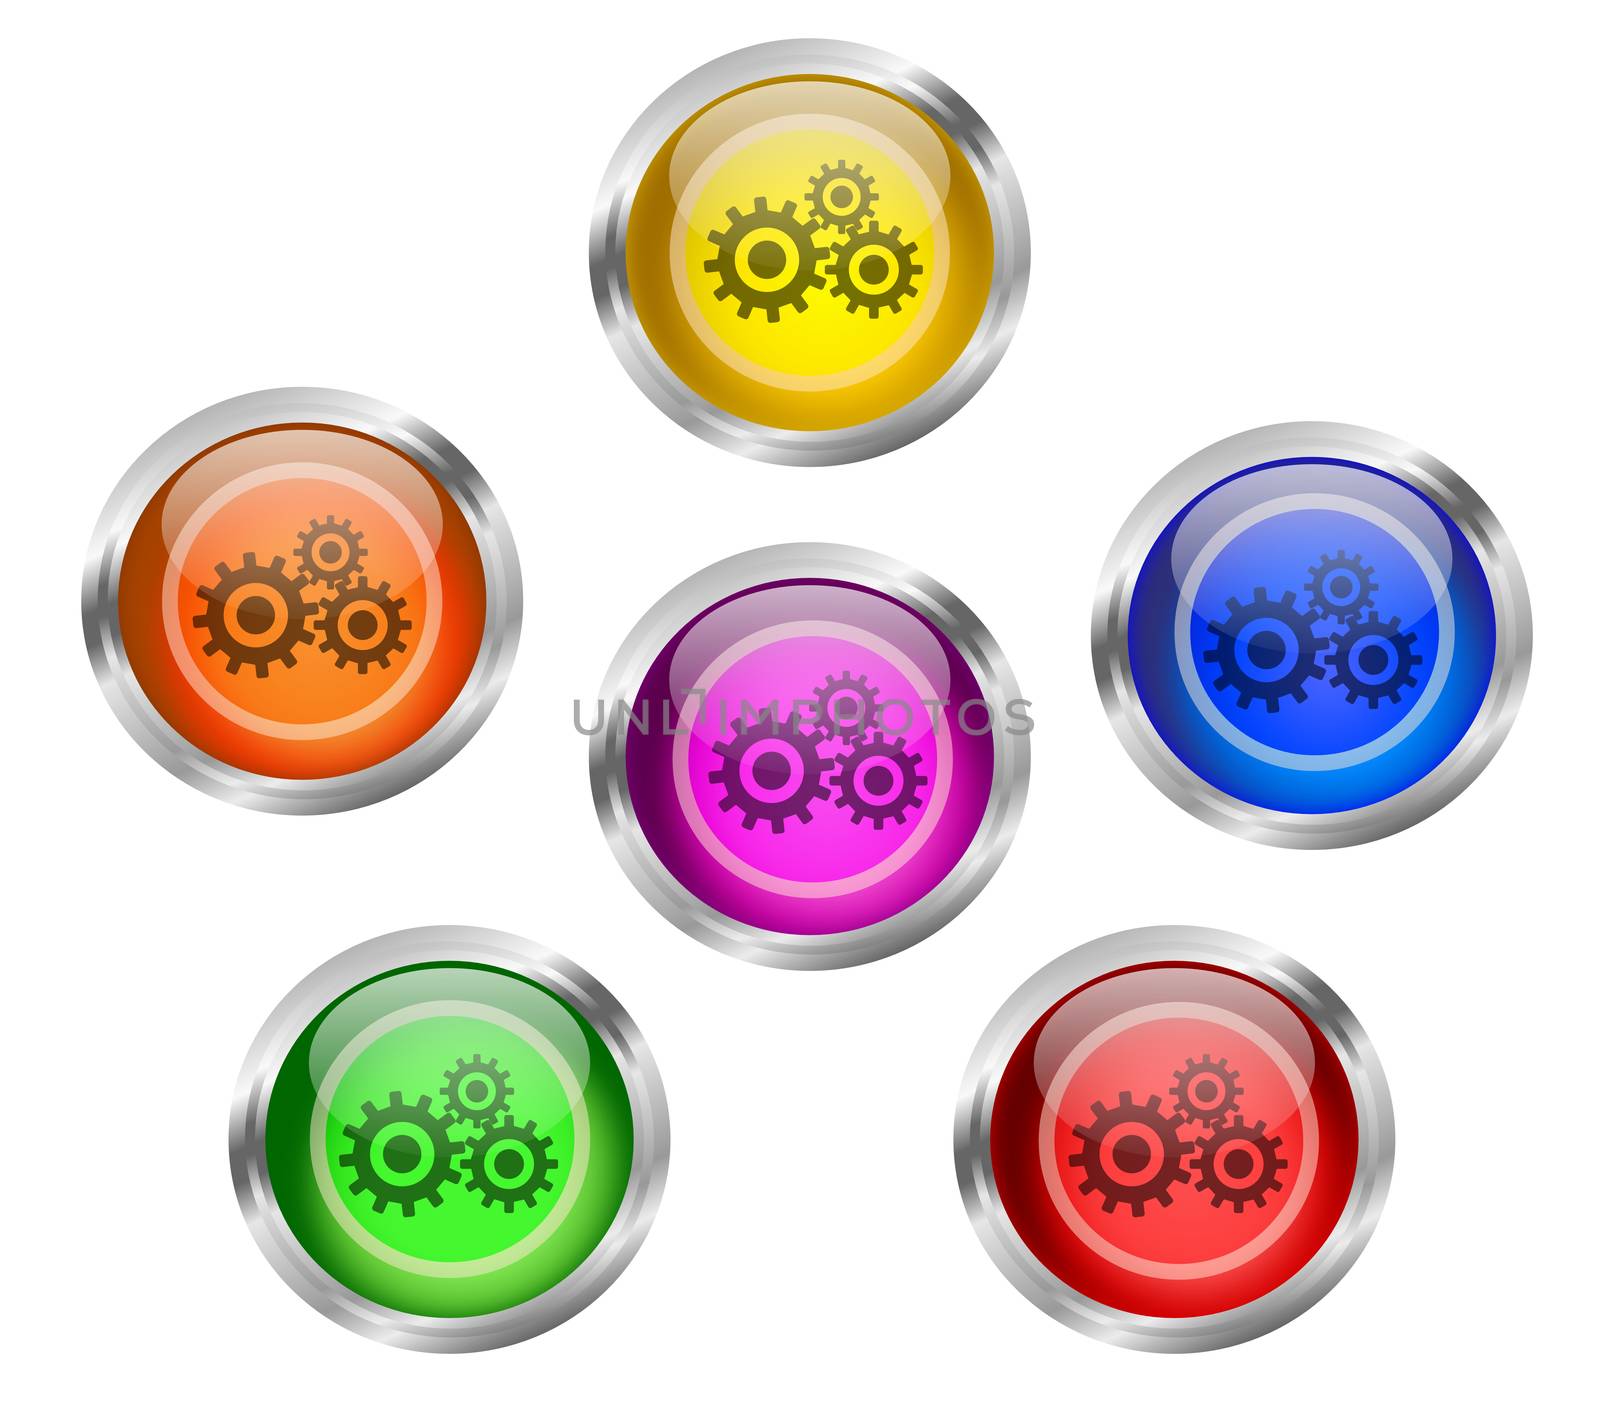 Set of shiny mechanical gears round web icon buttons in six different colors - yellow, orange, red, green, pink blue, with silver or chrome metallic rim.
